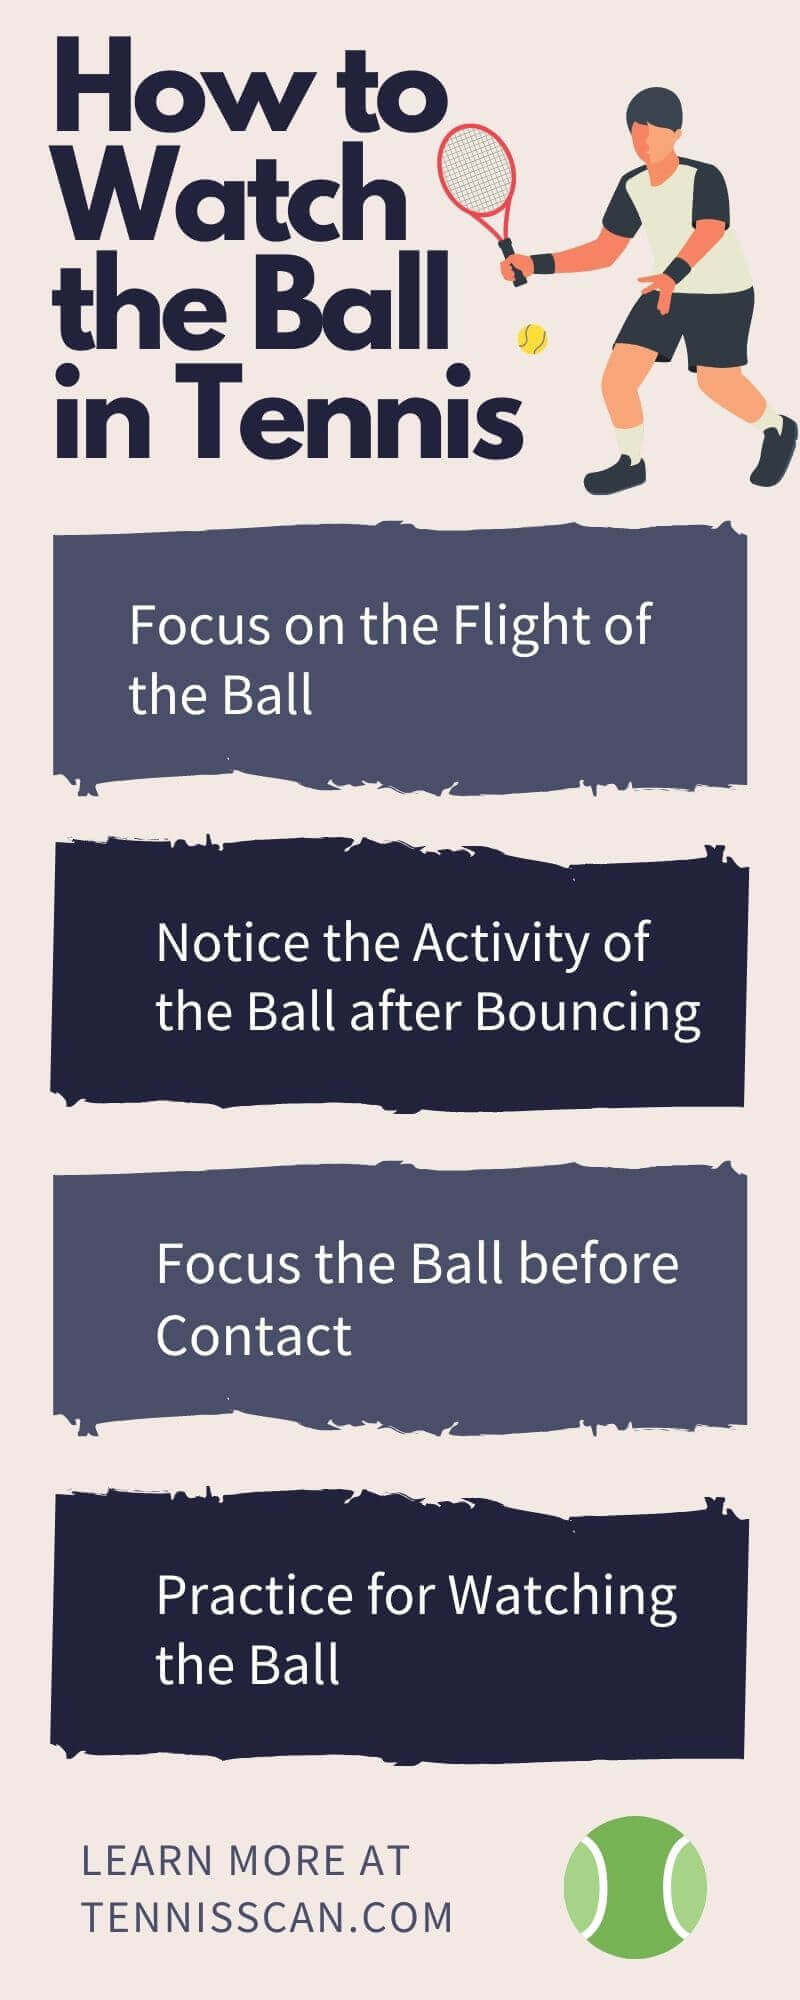 How to Watch the Ball in Tennis